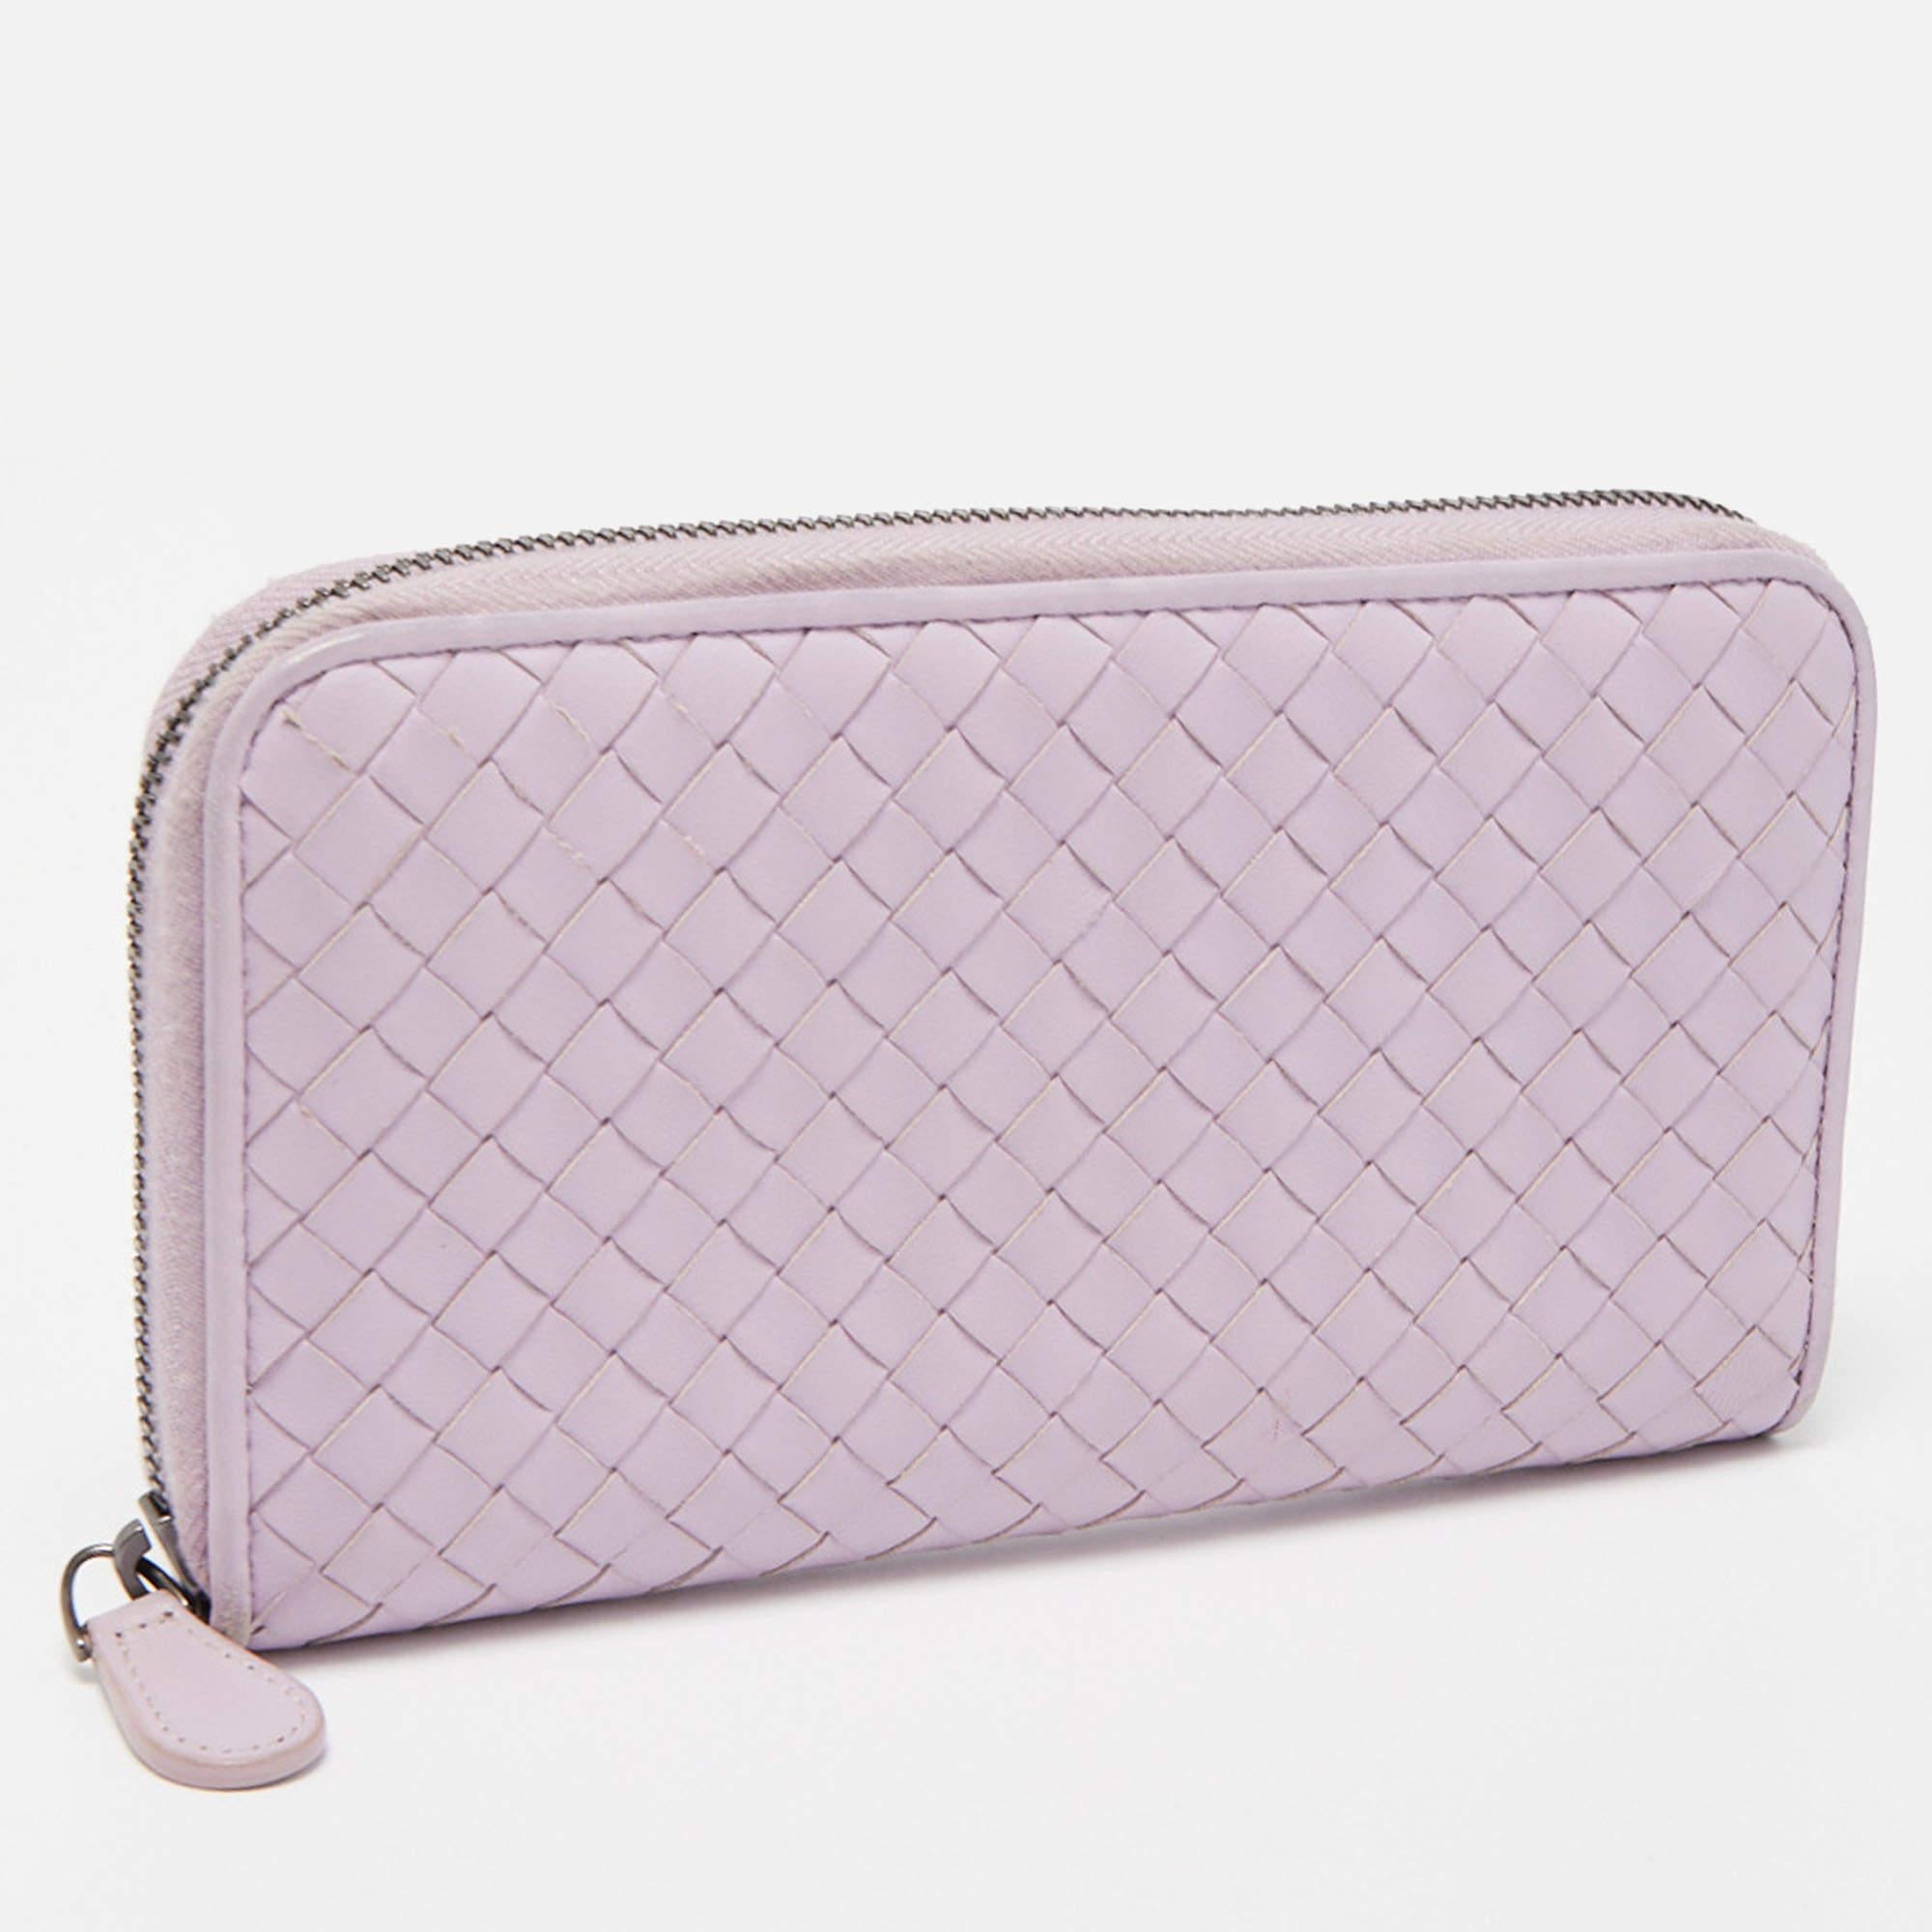 This Bottega Veneta wallet is an immaculate balance of sophistication and rational utility. It has been designed using prime quality materials and elevated by a sleek finish. The creation is equipped with ample space for your monetary essentials.

